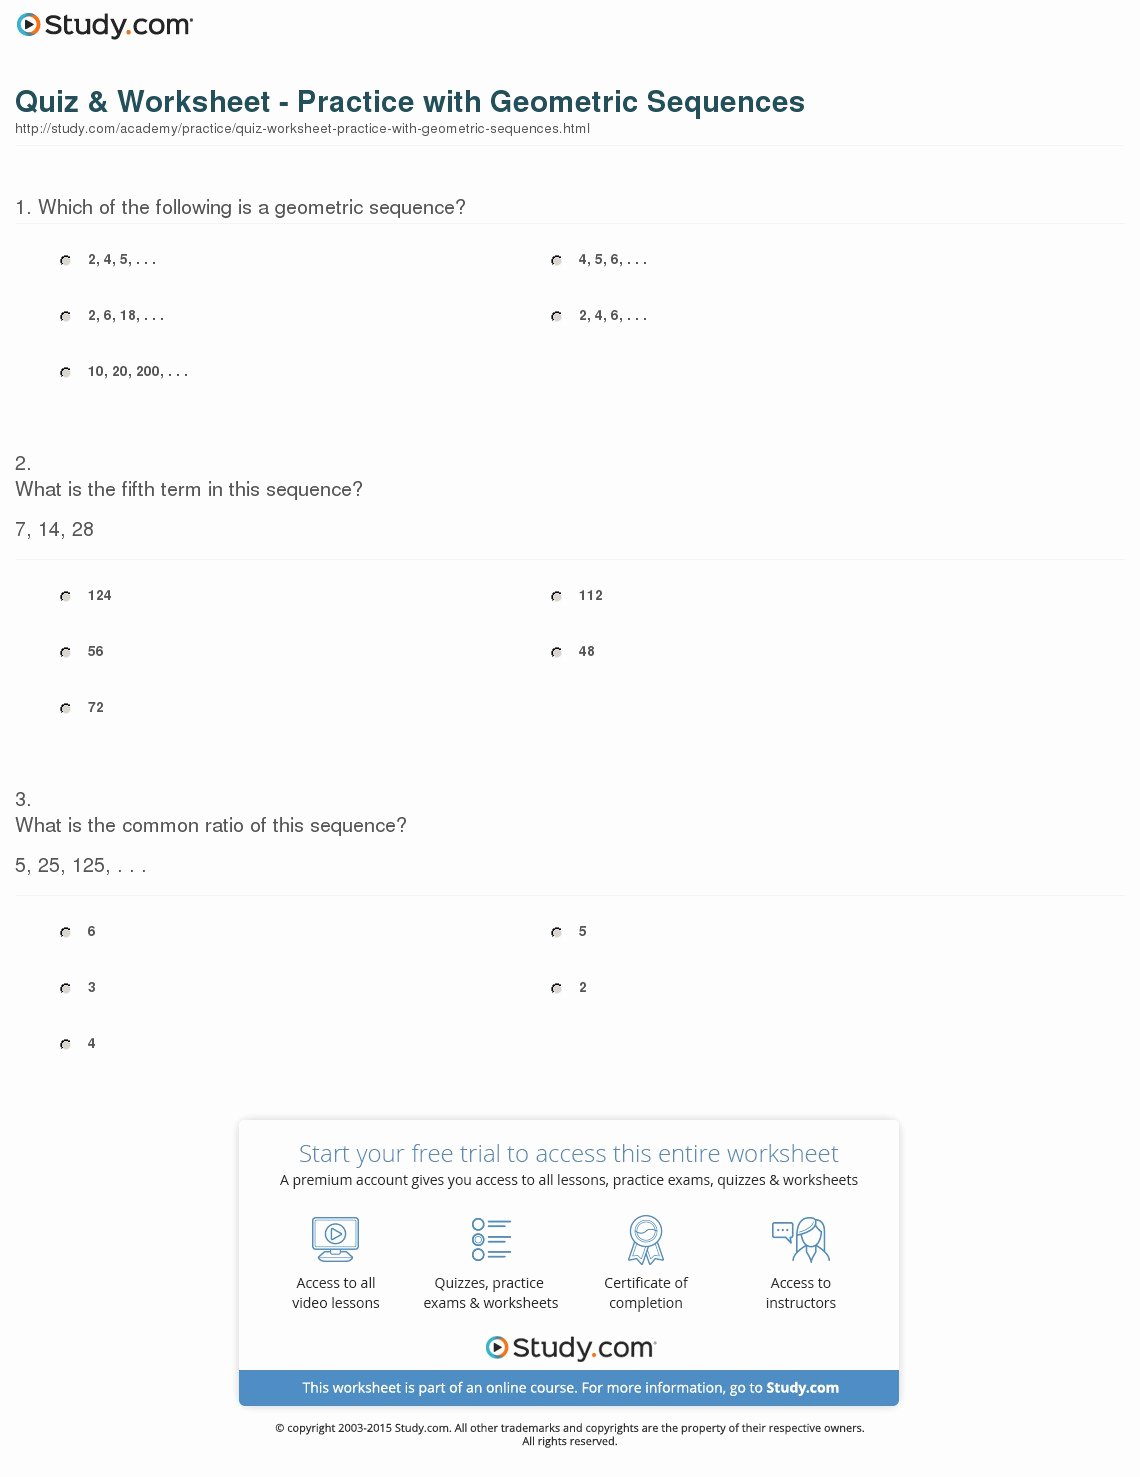 Geometric and Arithmetic Sequence Worksheet Awesome Quiz &amp; Worksheet Practice with Geometric Sequences